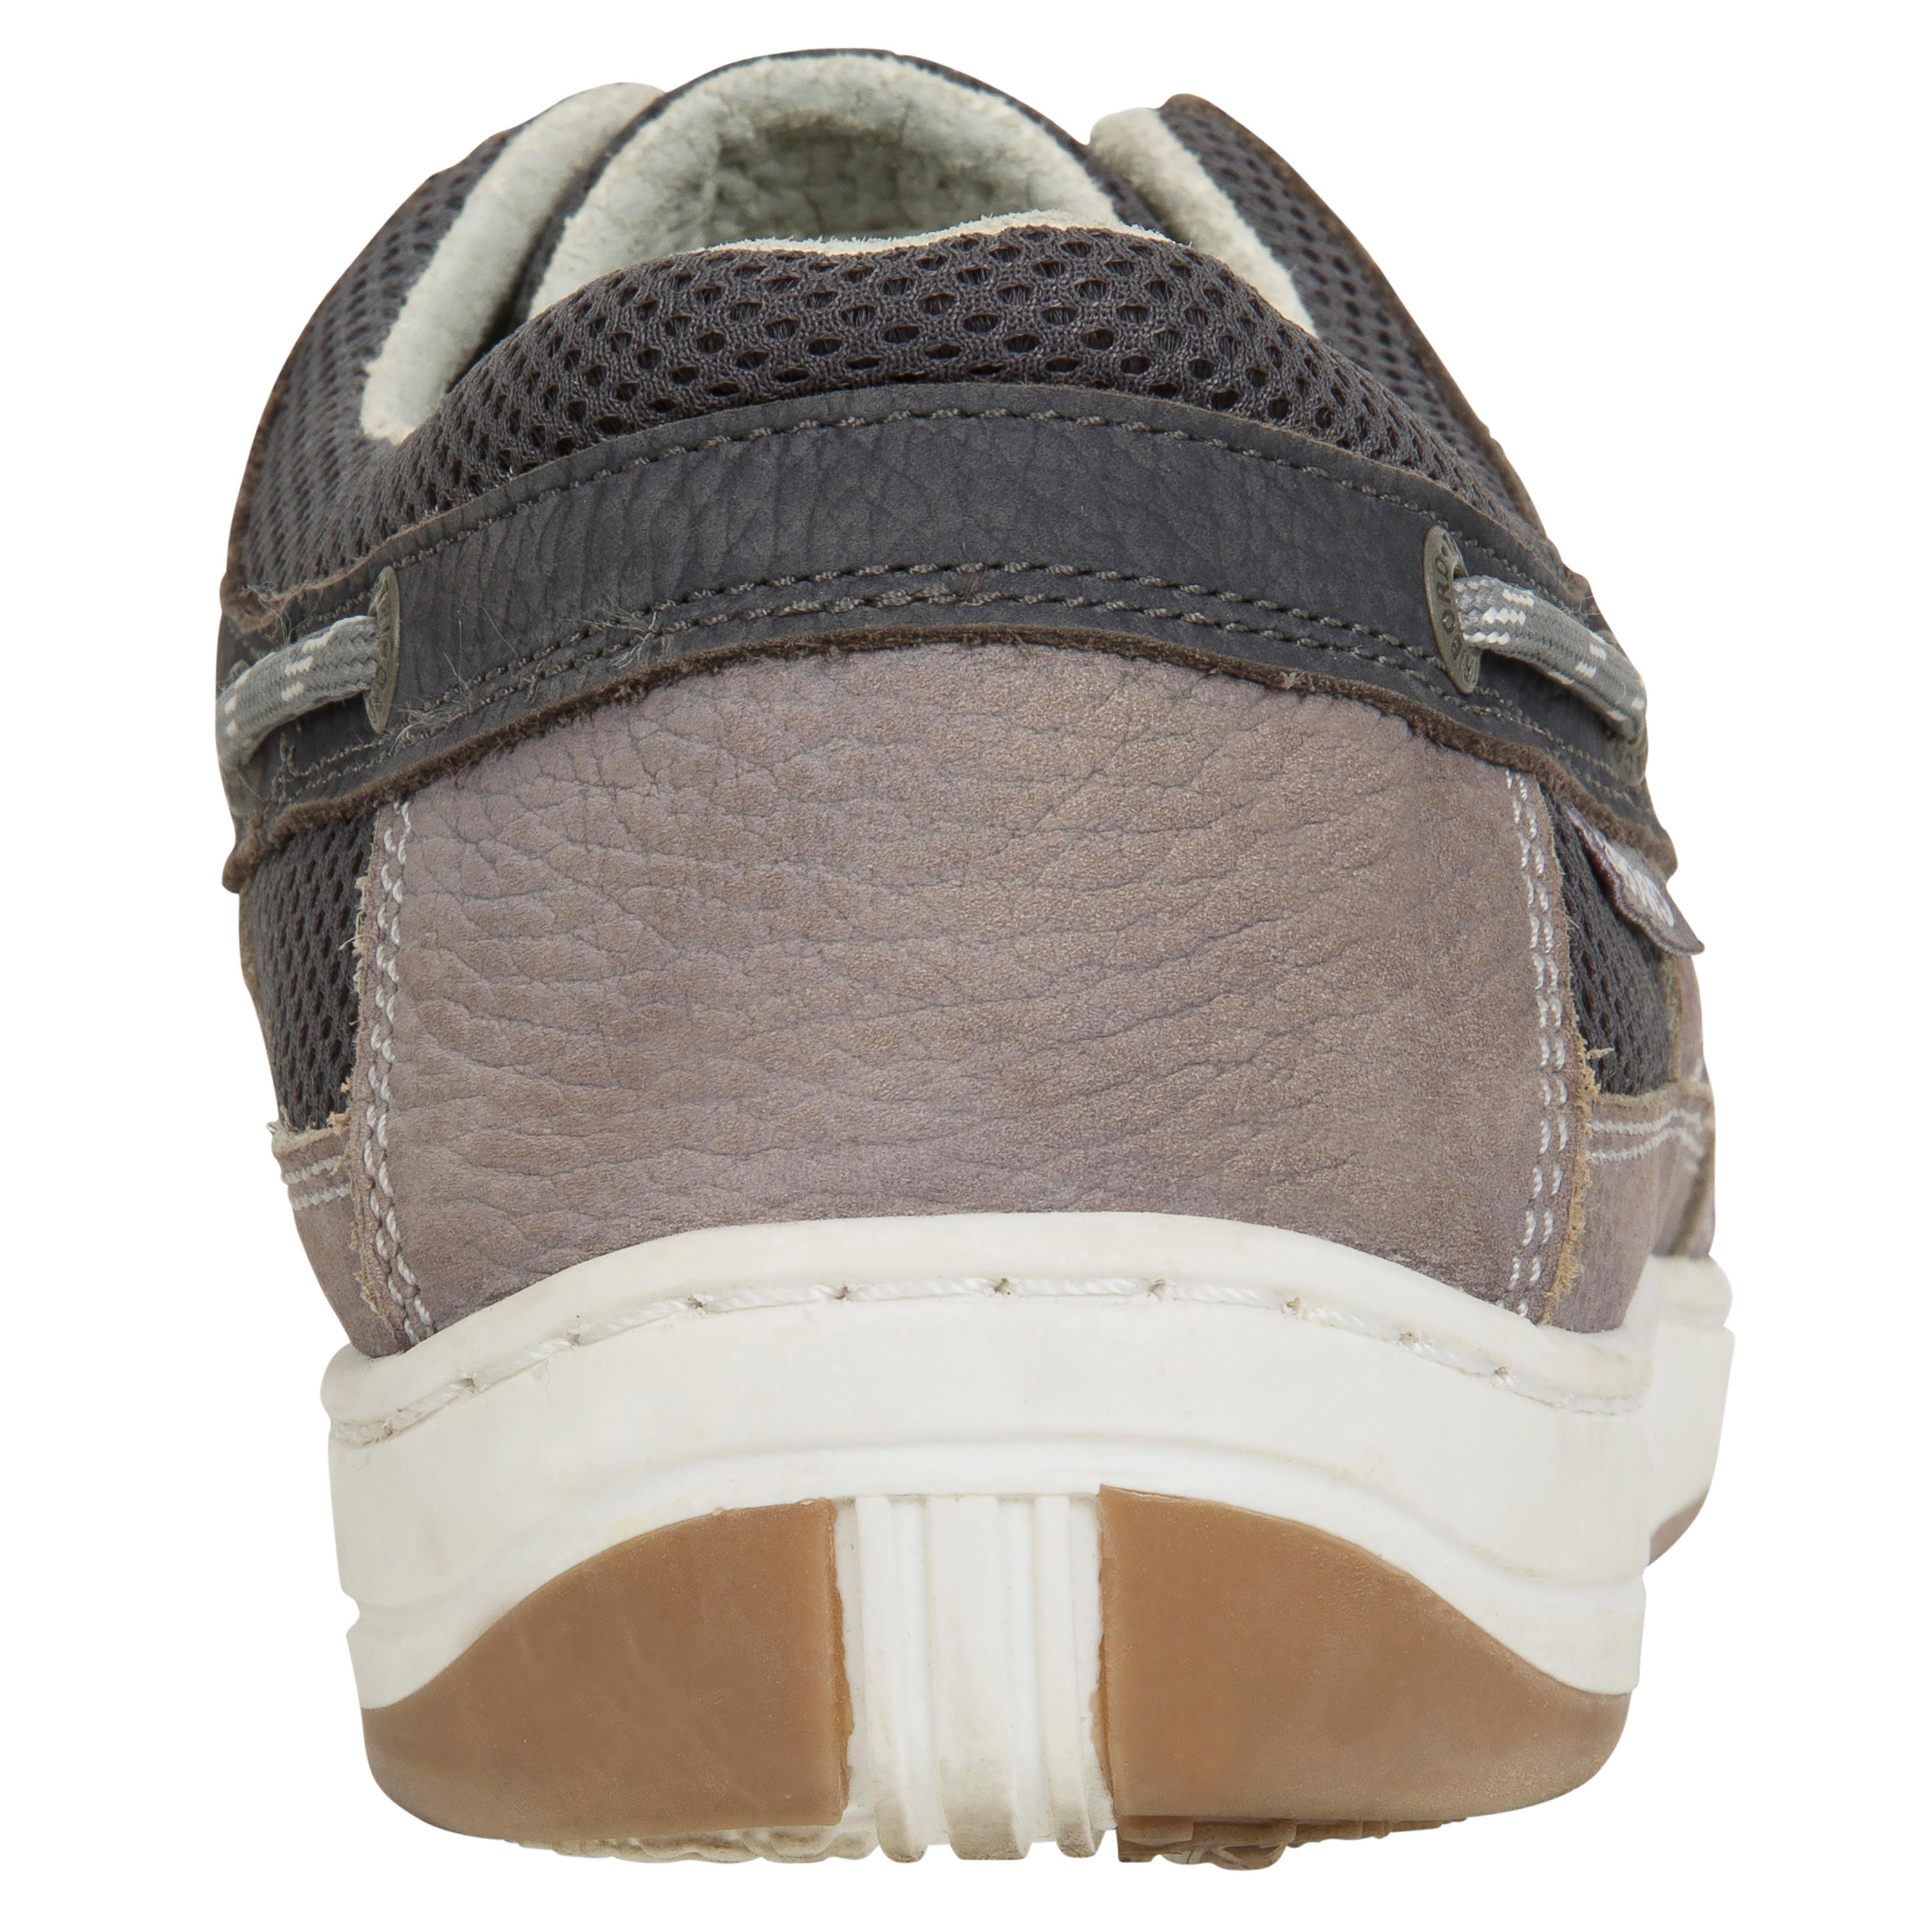 Men's Leather Boat Shoes CLIPPER - Grey 6/9